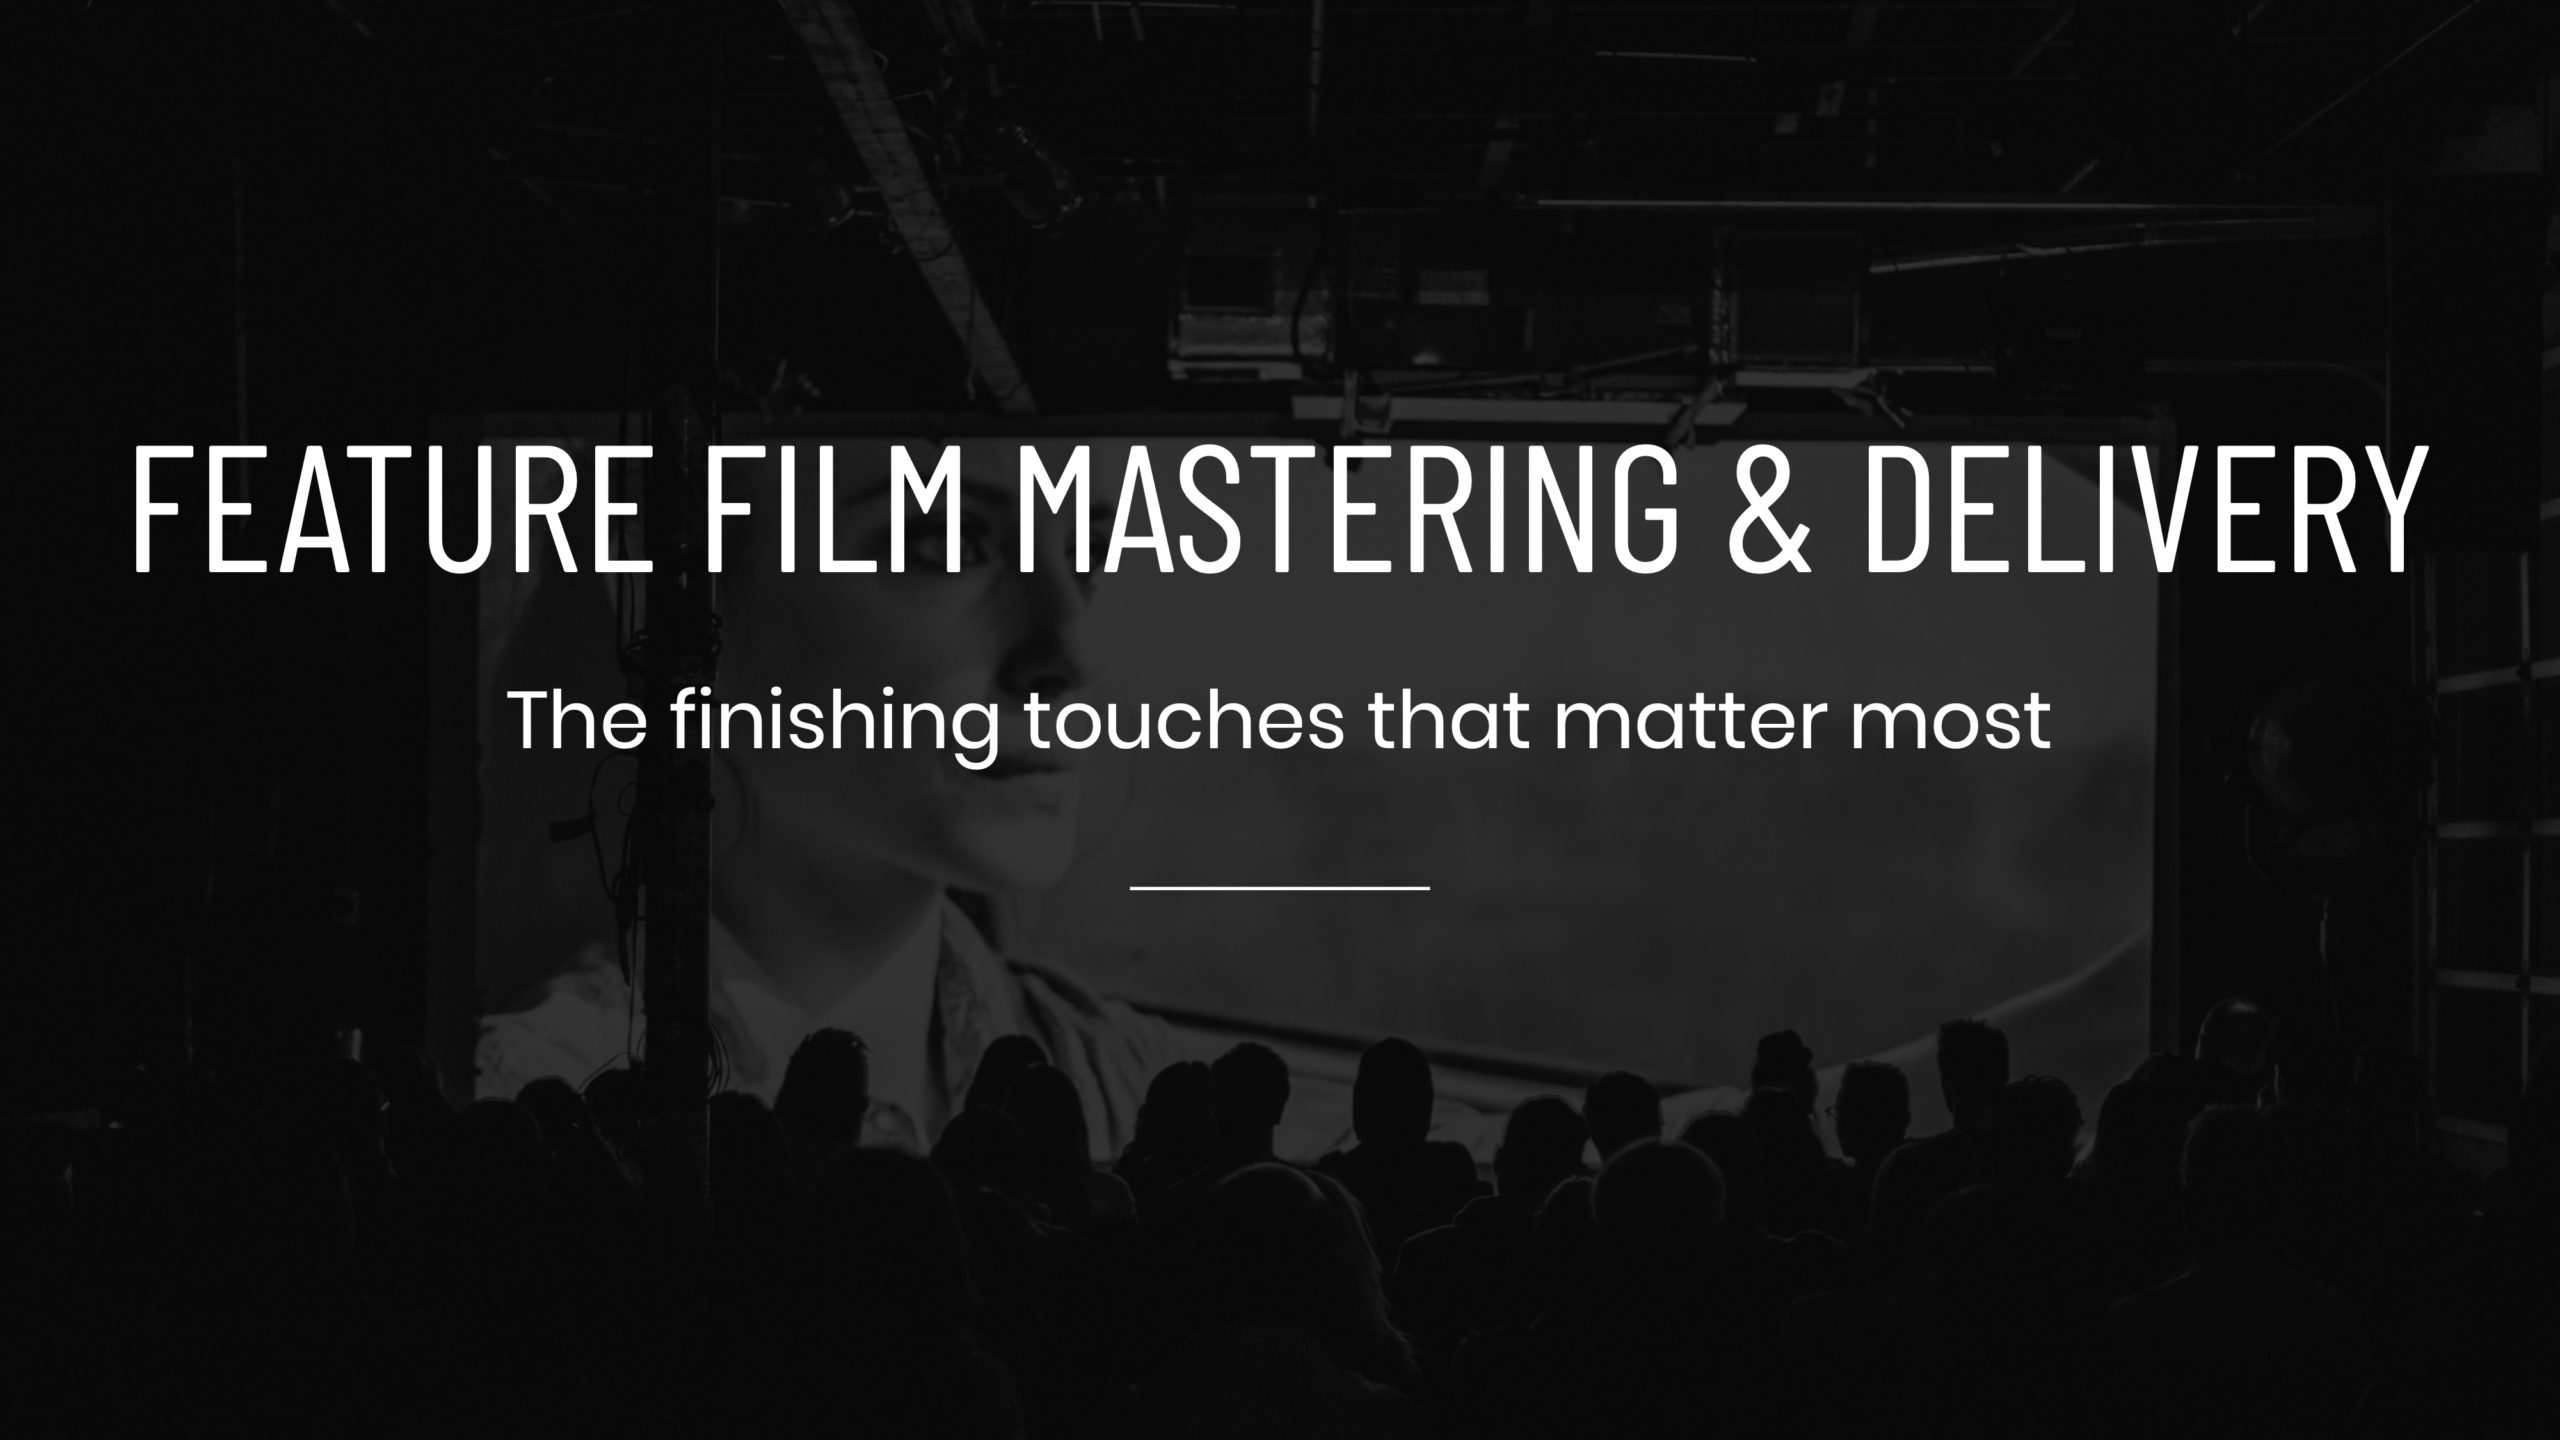 White Feature Film Mastering Delivery Services The finishing touches that matter most title by C&I Studios Tile on dimmed background view from behind of audience watching a movie on a projector screen